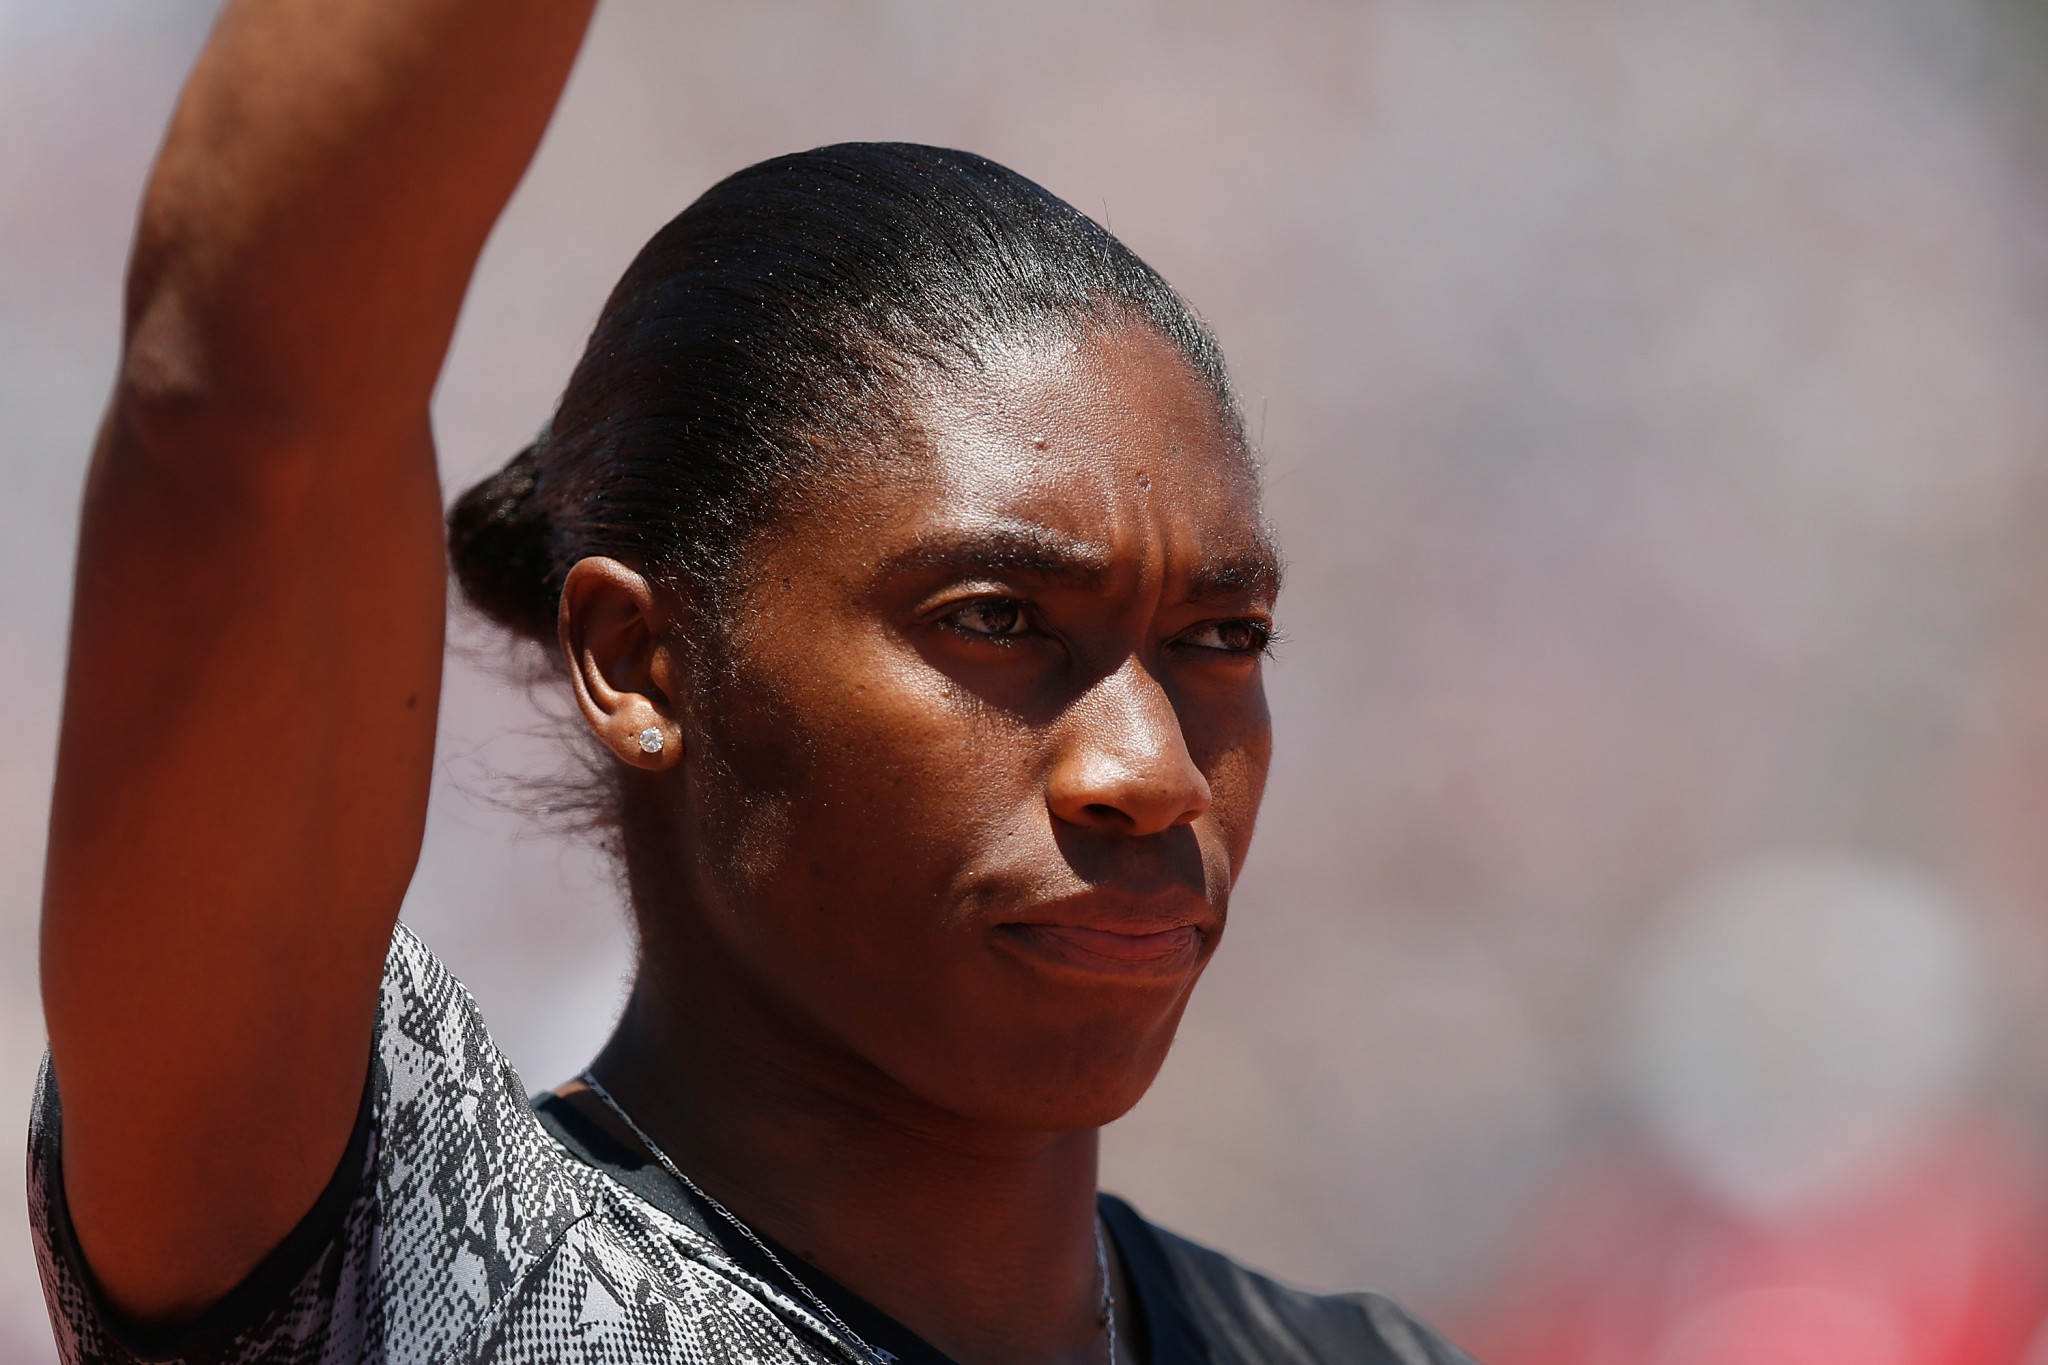 Caster Semenya has consistently stated she will not take medication to reduce her testosterone levels ©Getty Images